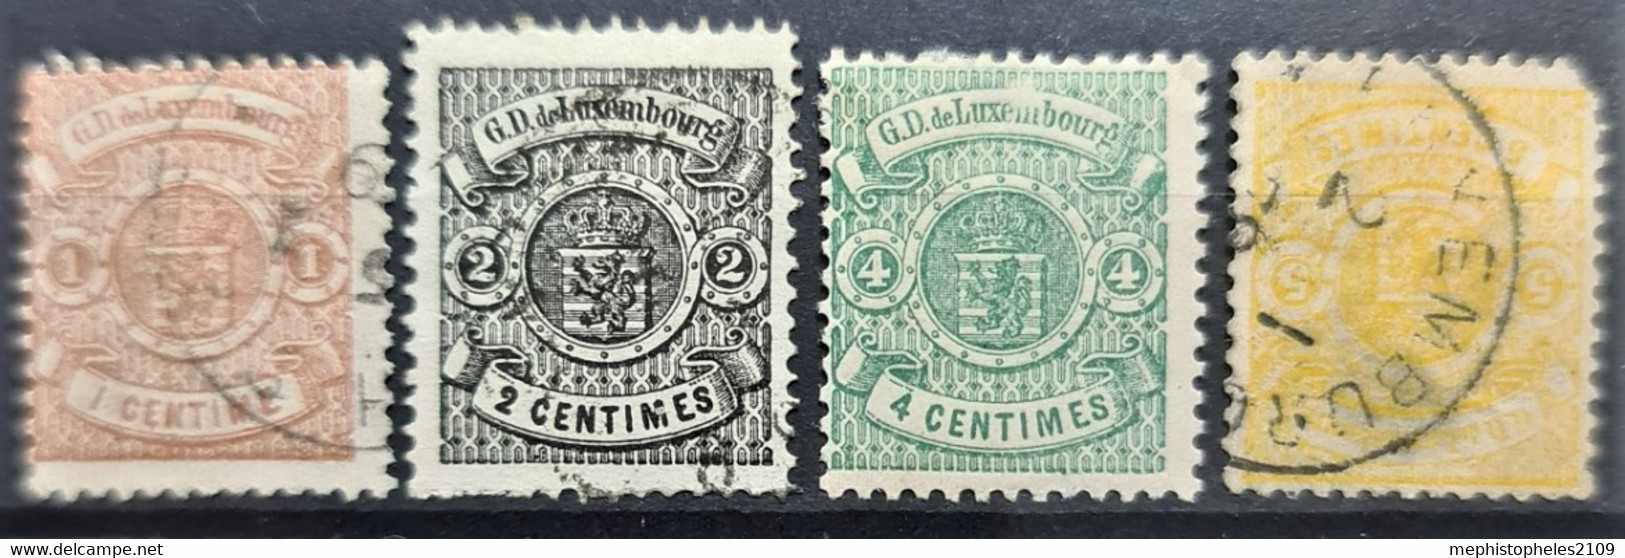 LUXEMBOURG 1876 - MLH/canceled - Sc# 29-32 - 1859-1880 Stemmi